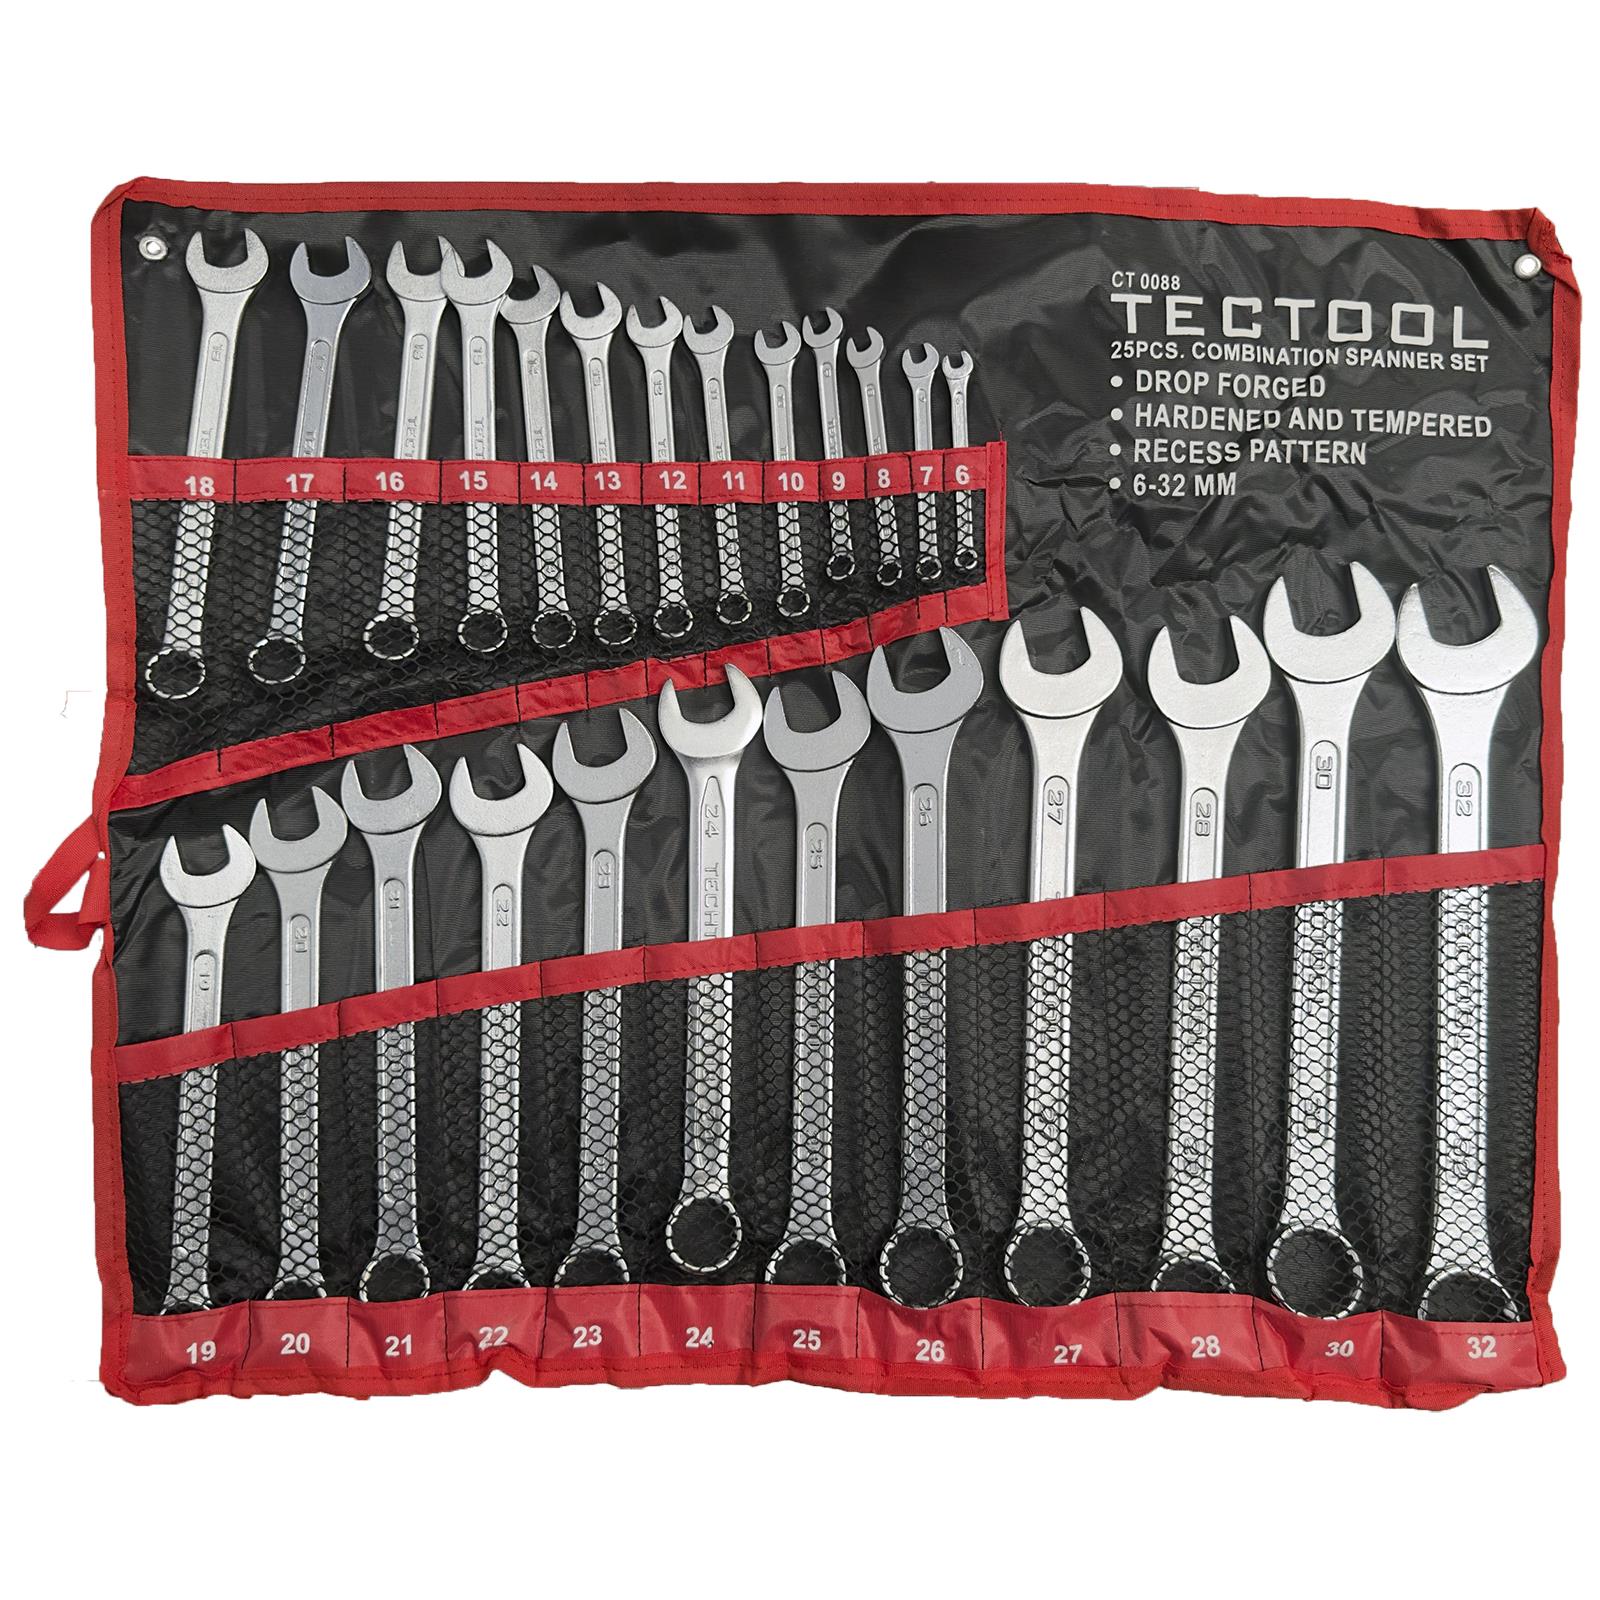 TECTOOL Combination Spanner Set Metric Combo Open End Ring Garge Tool Set 25pc